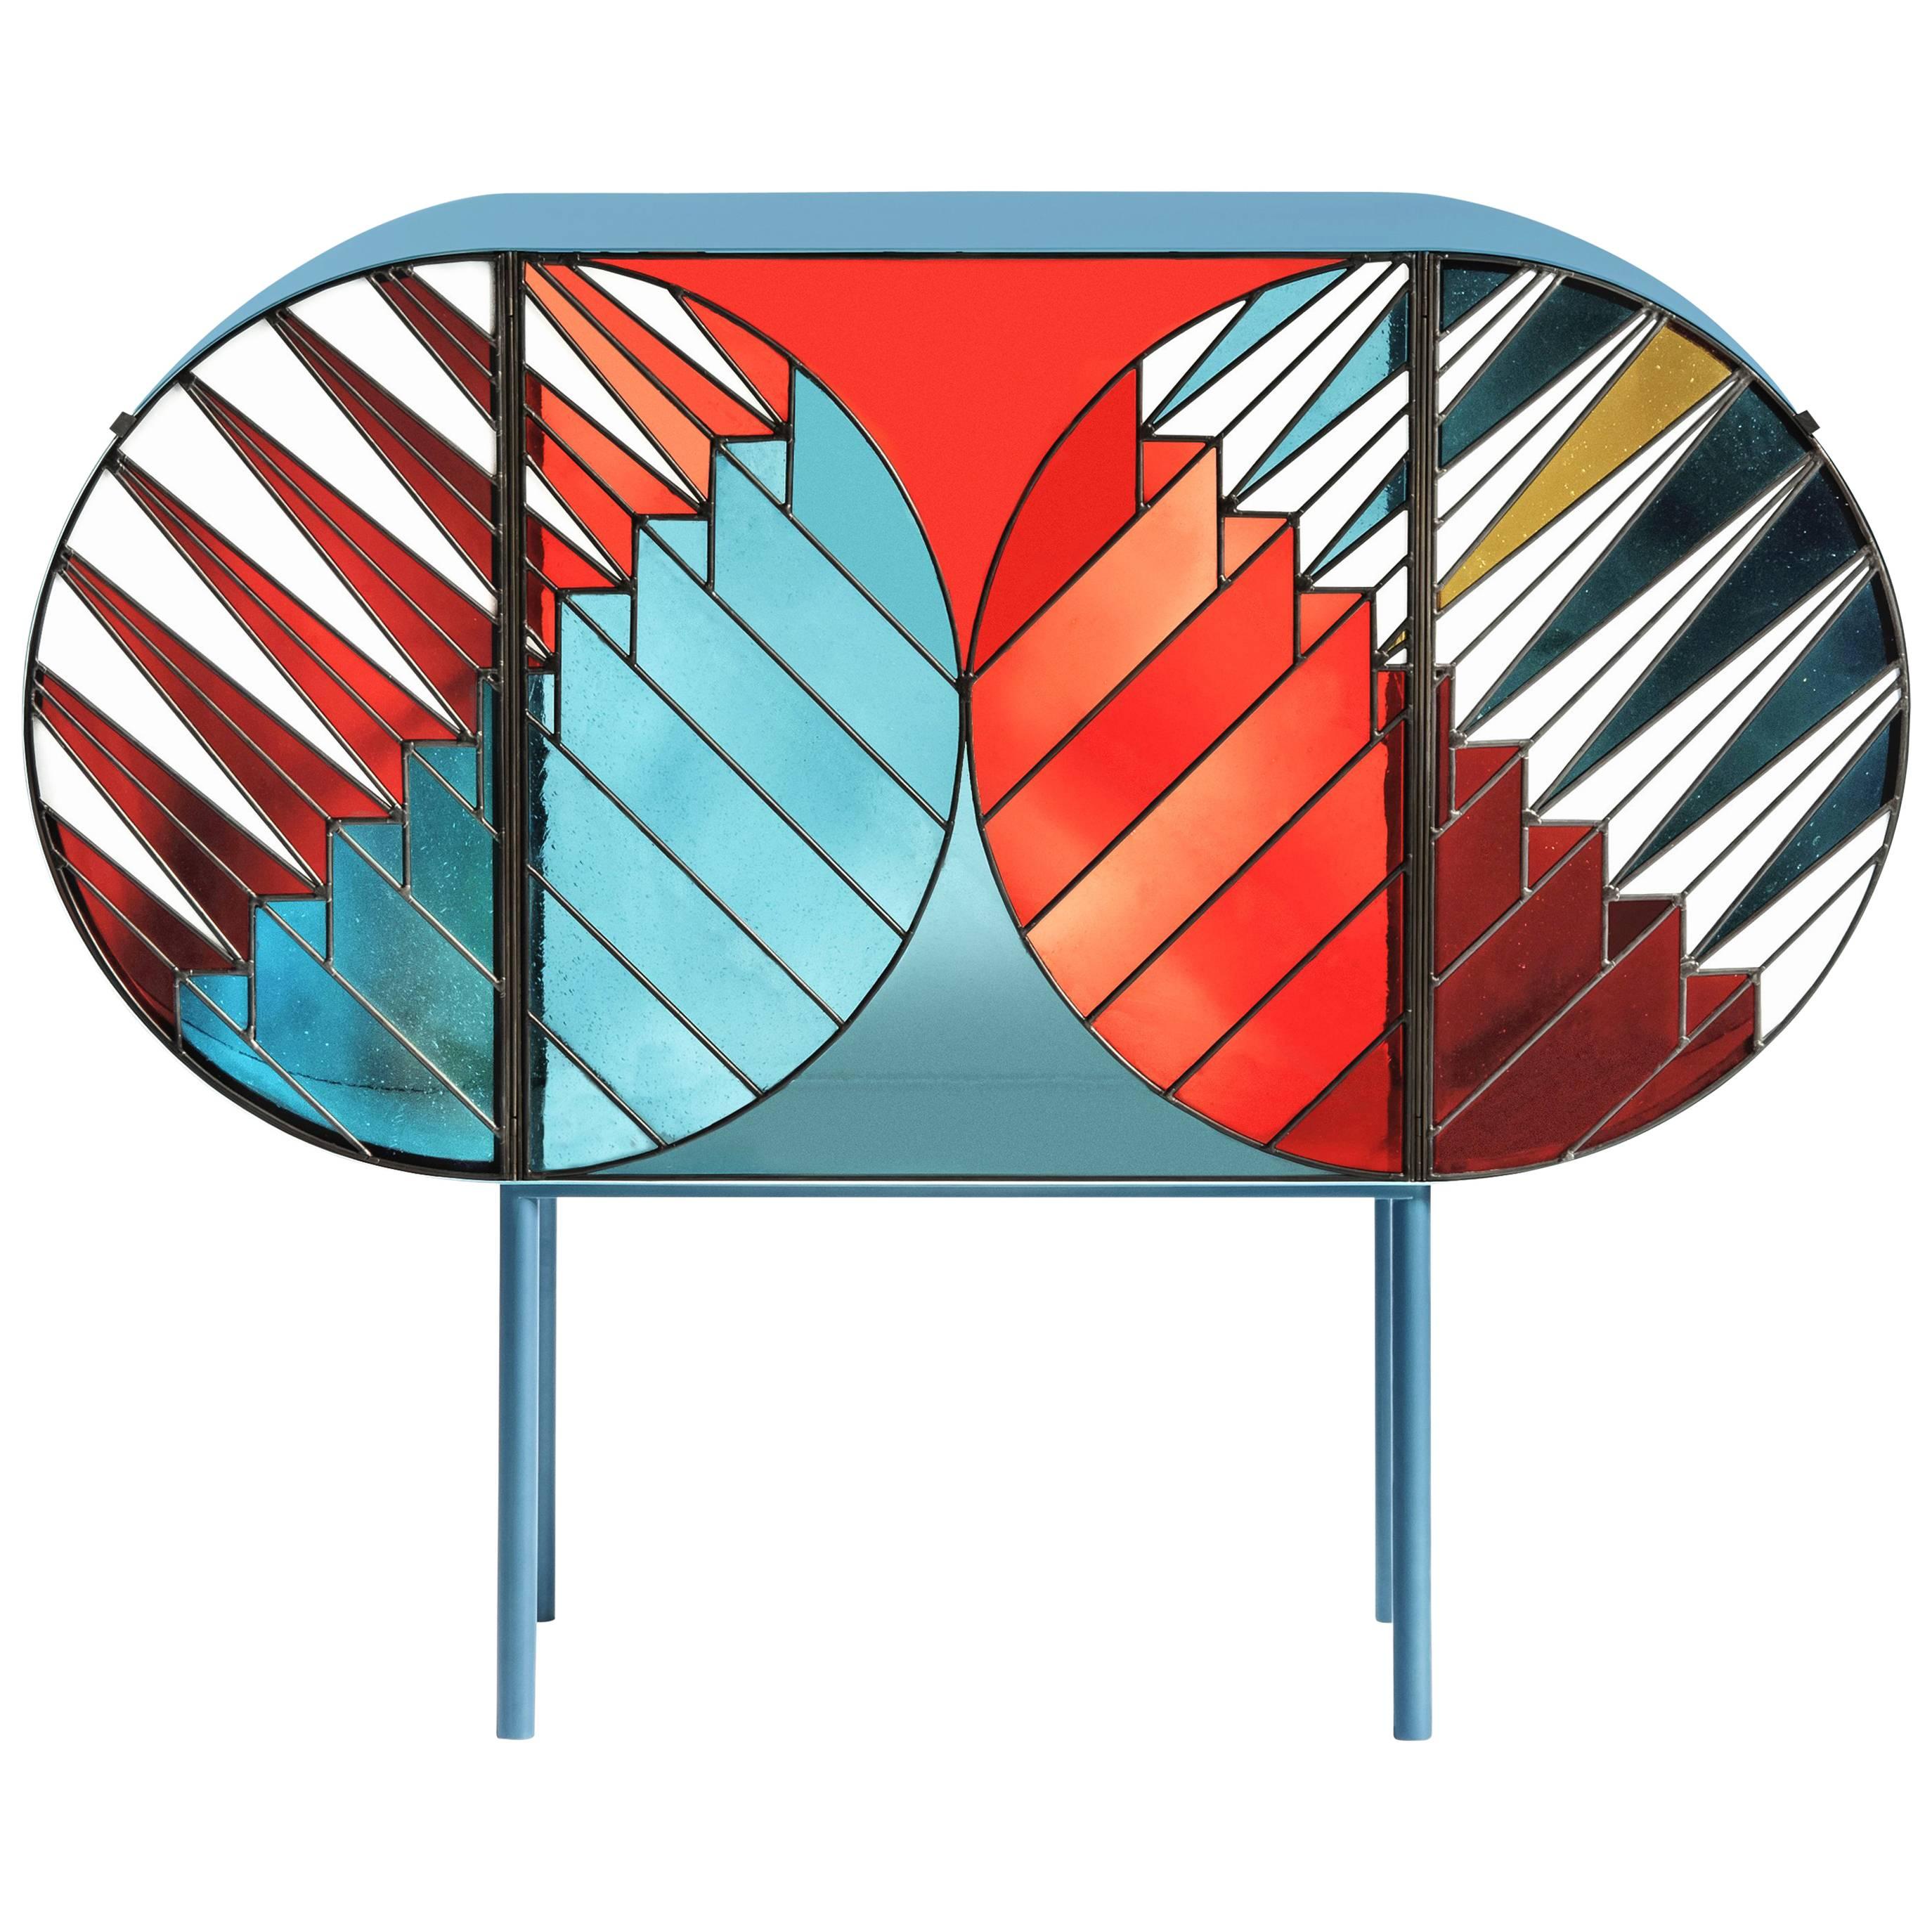 Credenza Sideboard in Stained Glass Design Patricia Urquiola & Federico Pepe For Sale